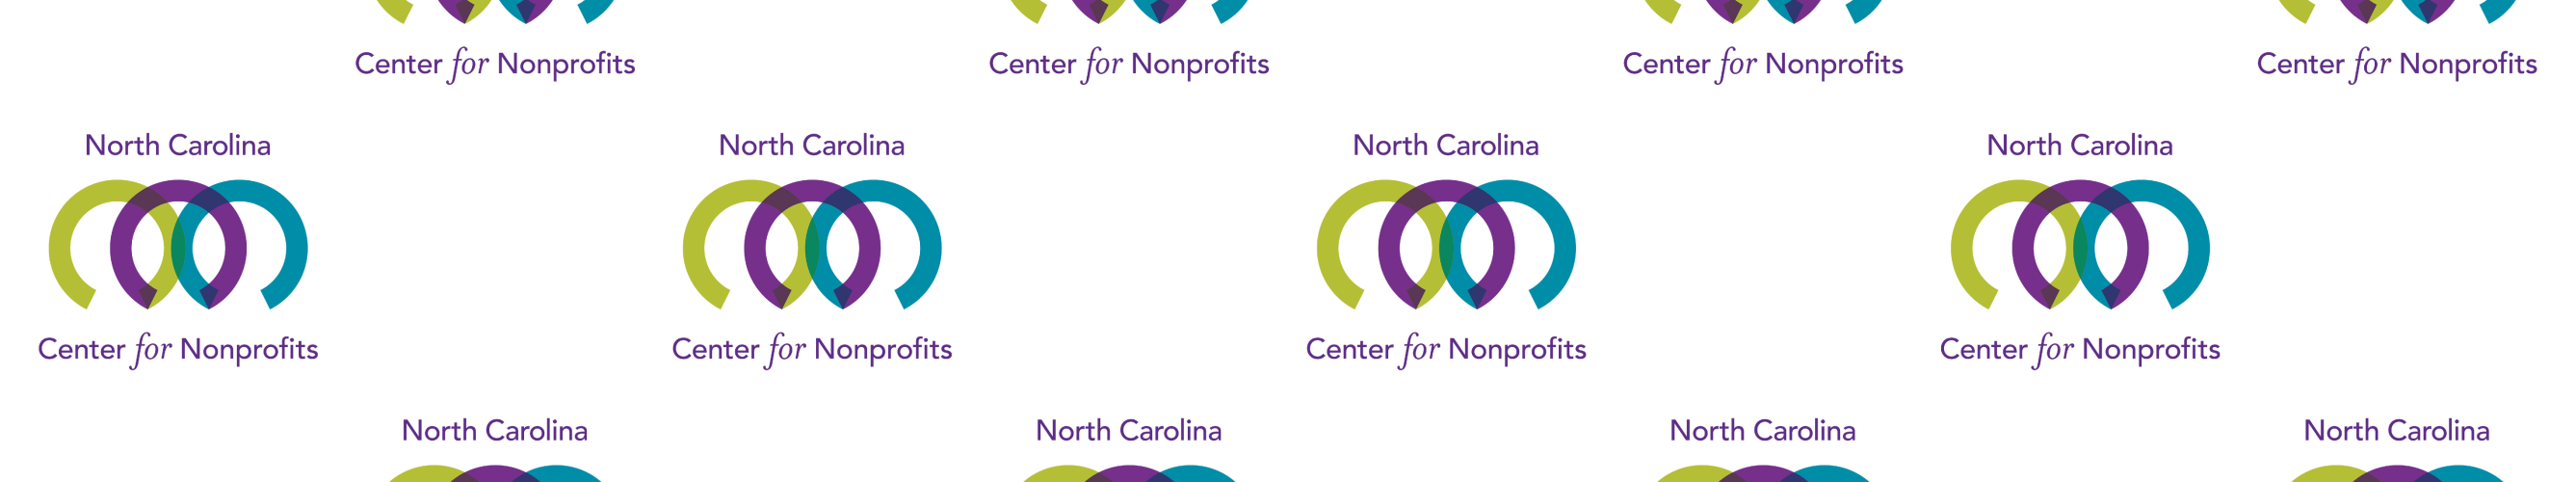 Step and repeat NCCNP logo banner